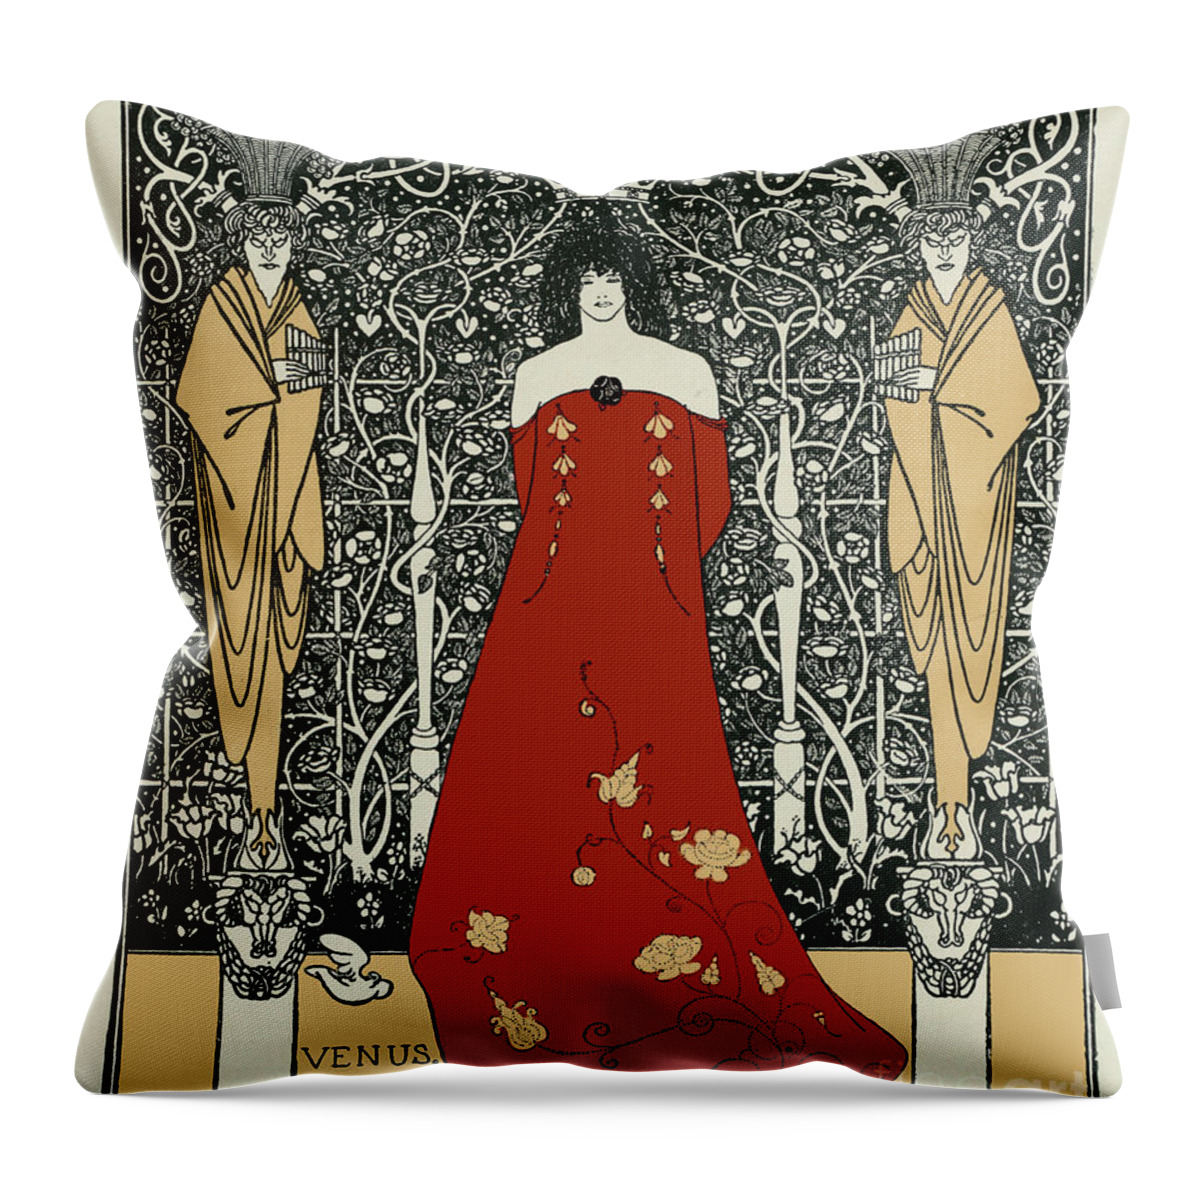 Aubrey Beardsley Throw Pillow featuring the drawing Opening Act of Venus and Tannhauser by Aubrey Beardsley